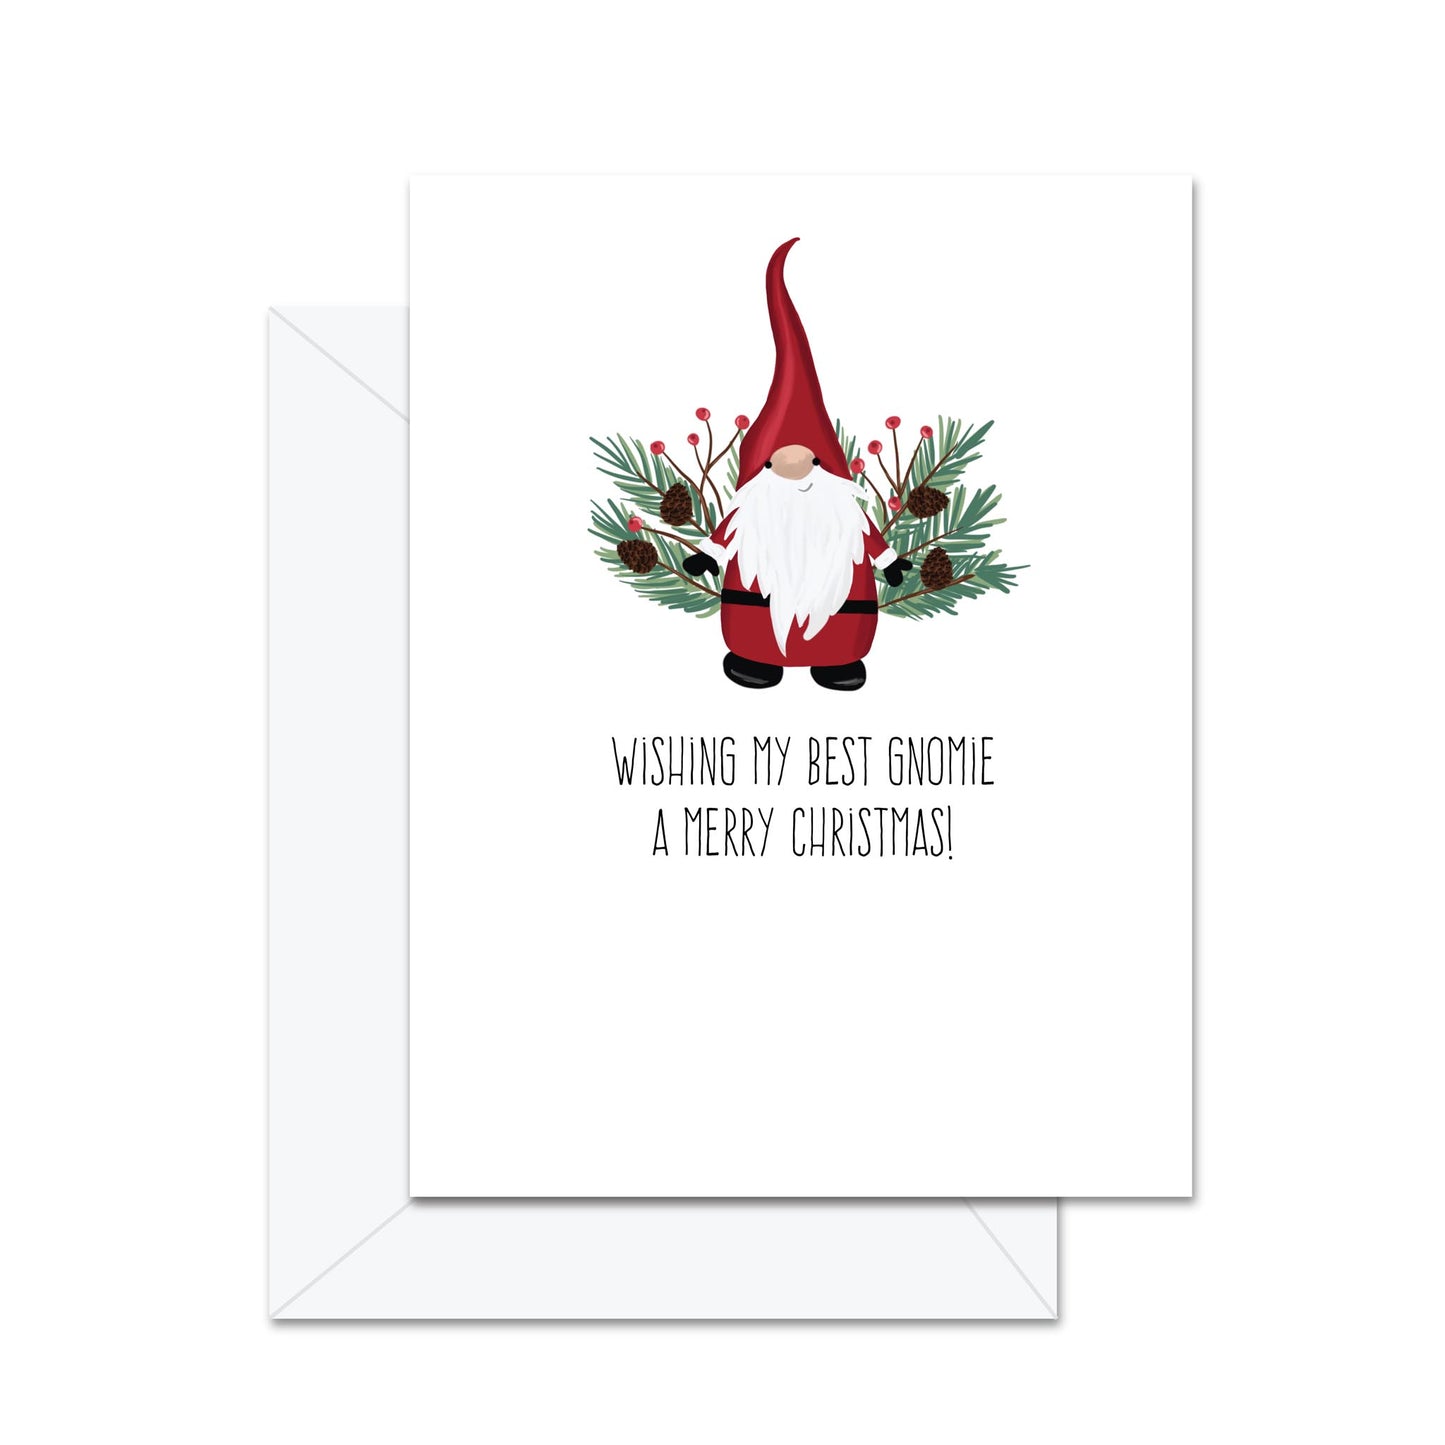 Wishing My Best Gnomie A Merry Christmas! - Greeting Card